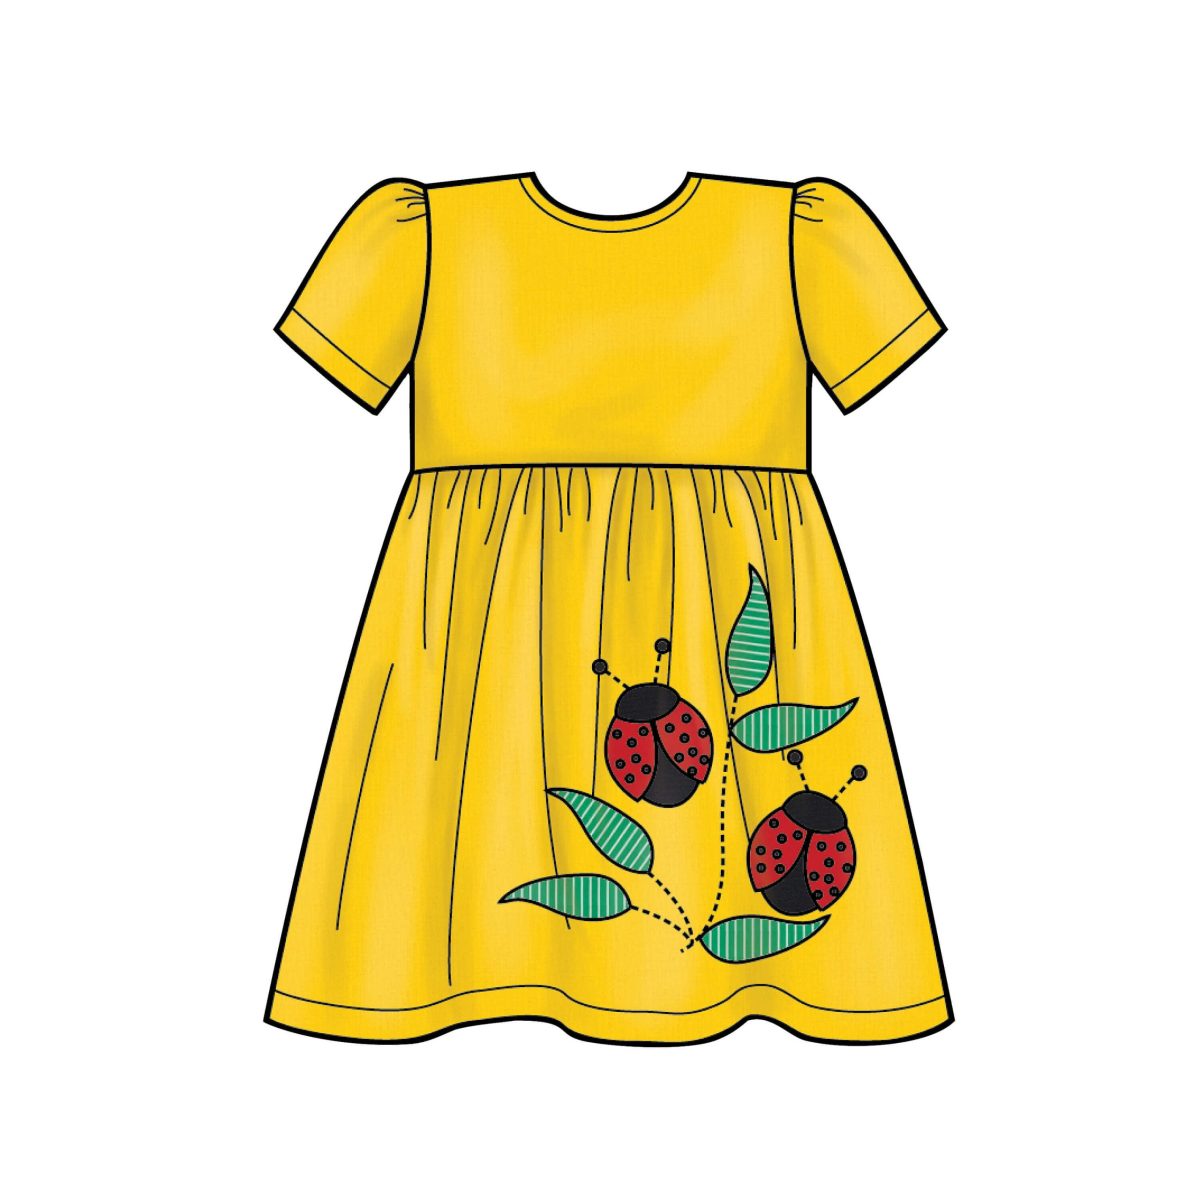 New Look Sewing Pattern N6647 Toddlers' Dresses with Appliques